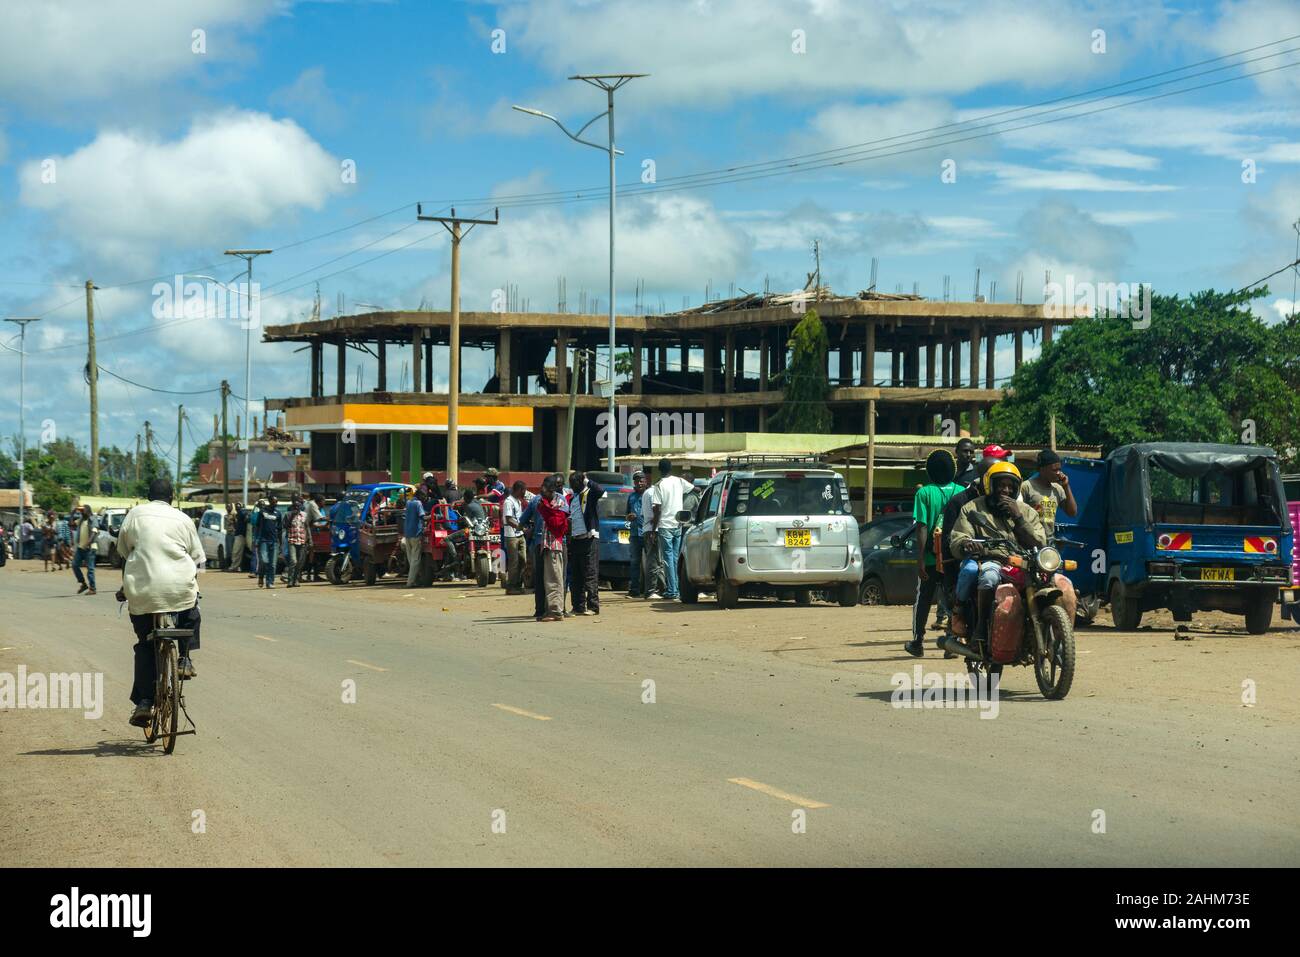 Locals going about daily life by the road, Kimana, Kenya Stock Photo